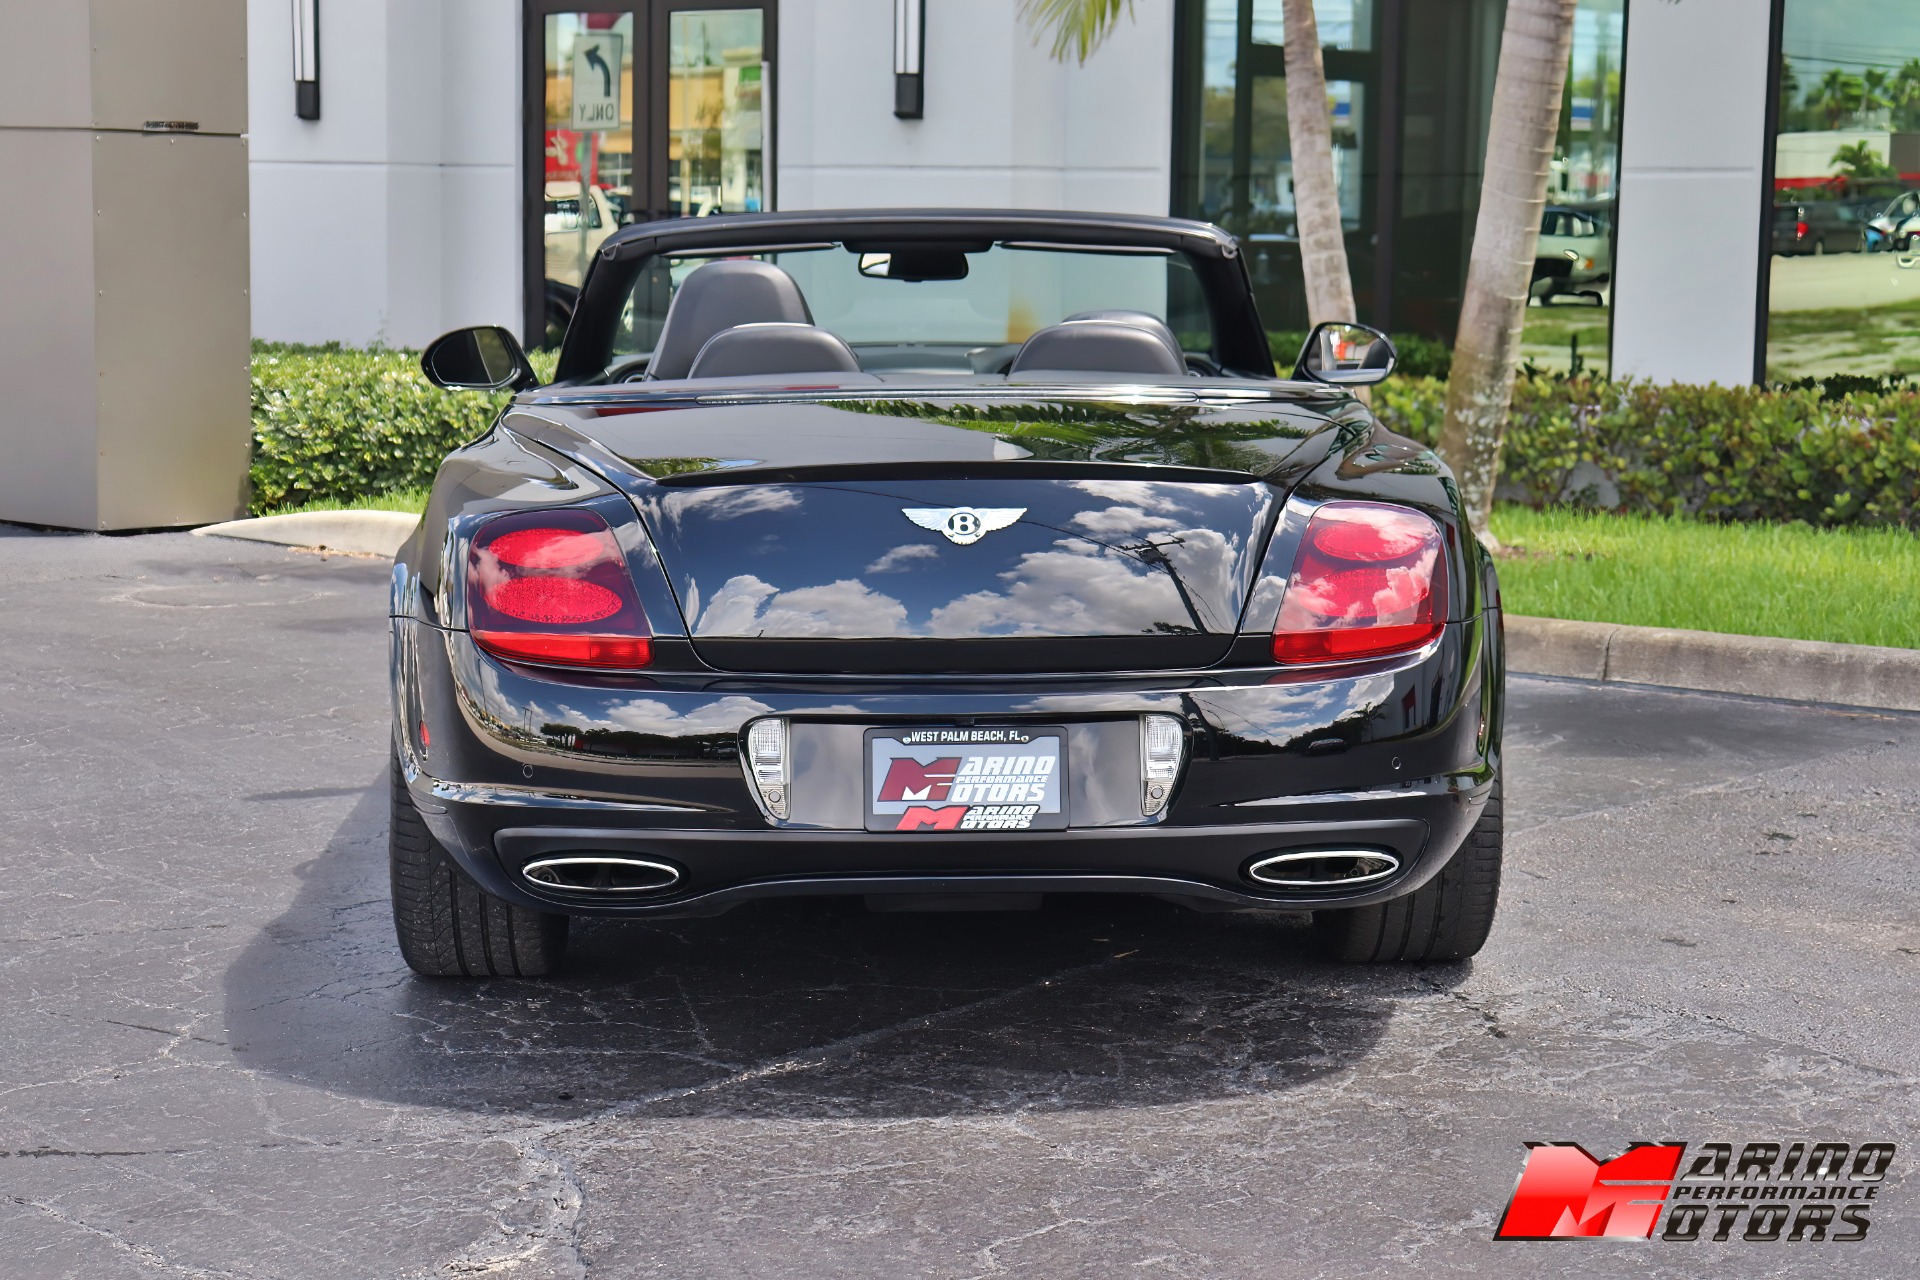 Used-2011-Bentley-Continental-Supersports-Convertible